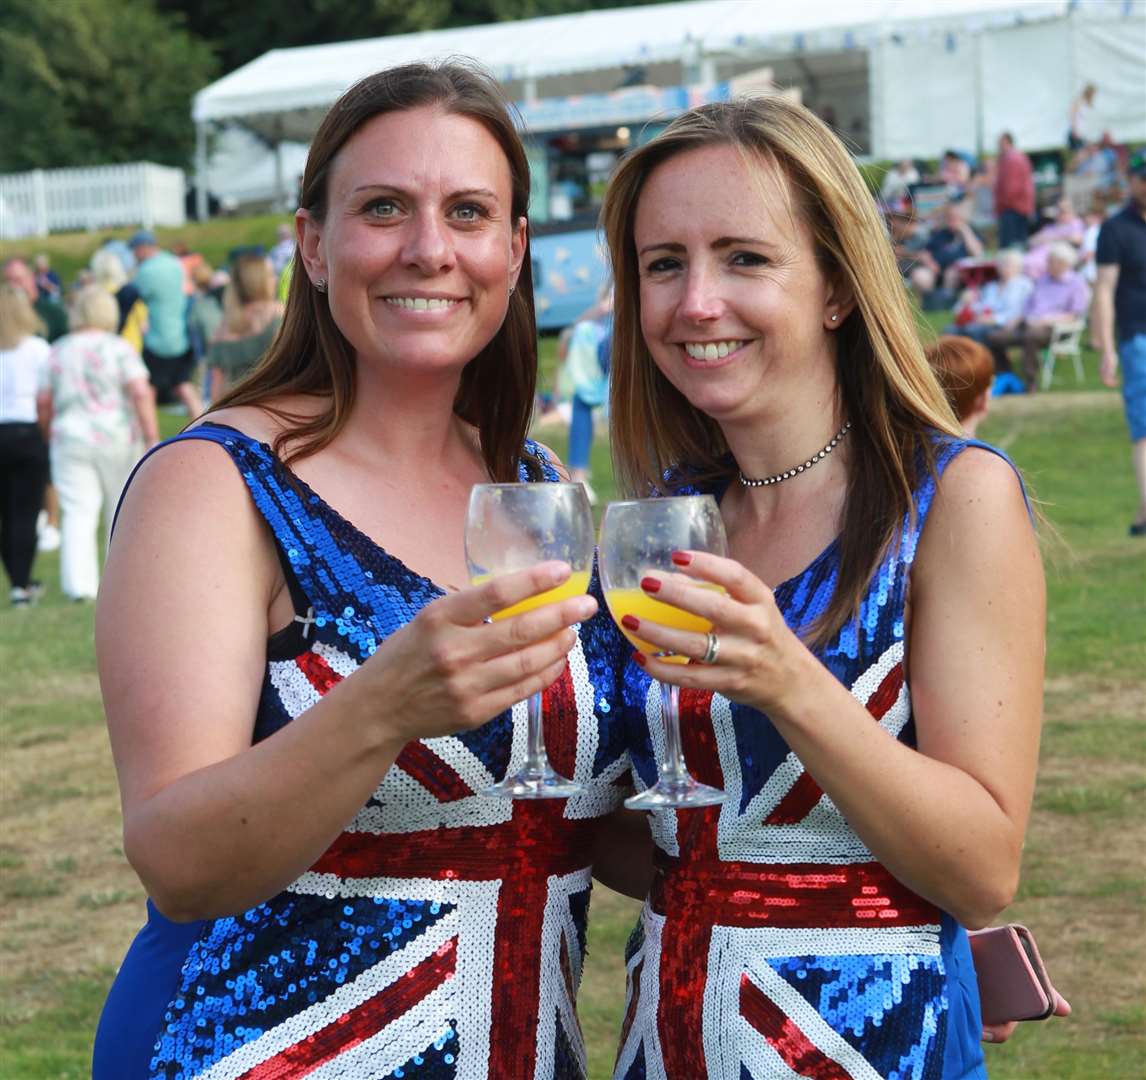 From left, Suzanne Lake and Kelly Lywood, from Sittingbourne in union jack dresses at Leeds Castle Classical Concert. Picture: John Westhrop